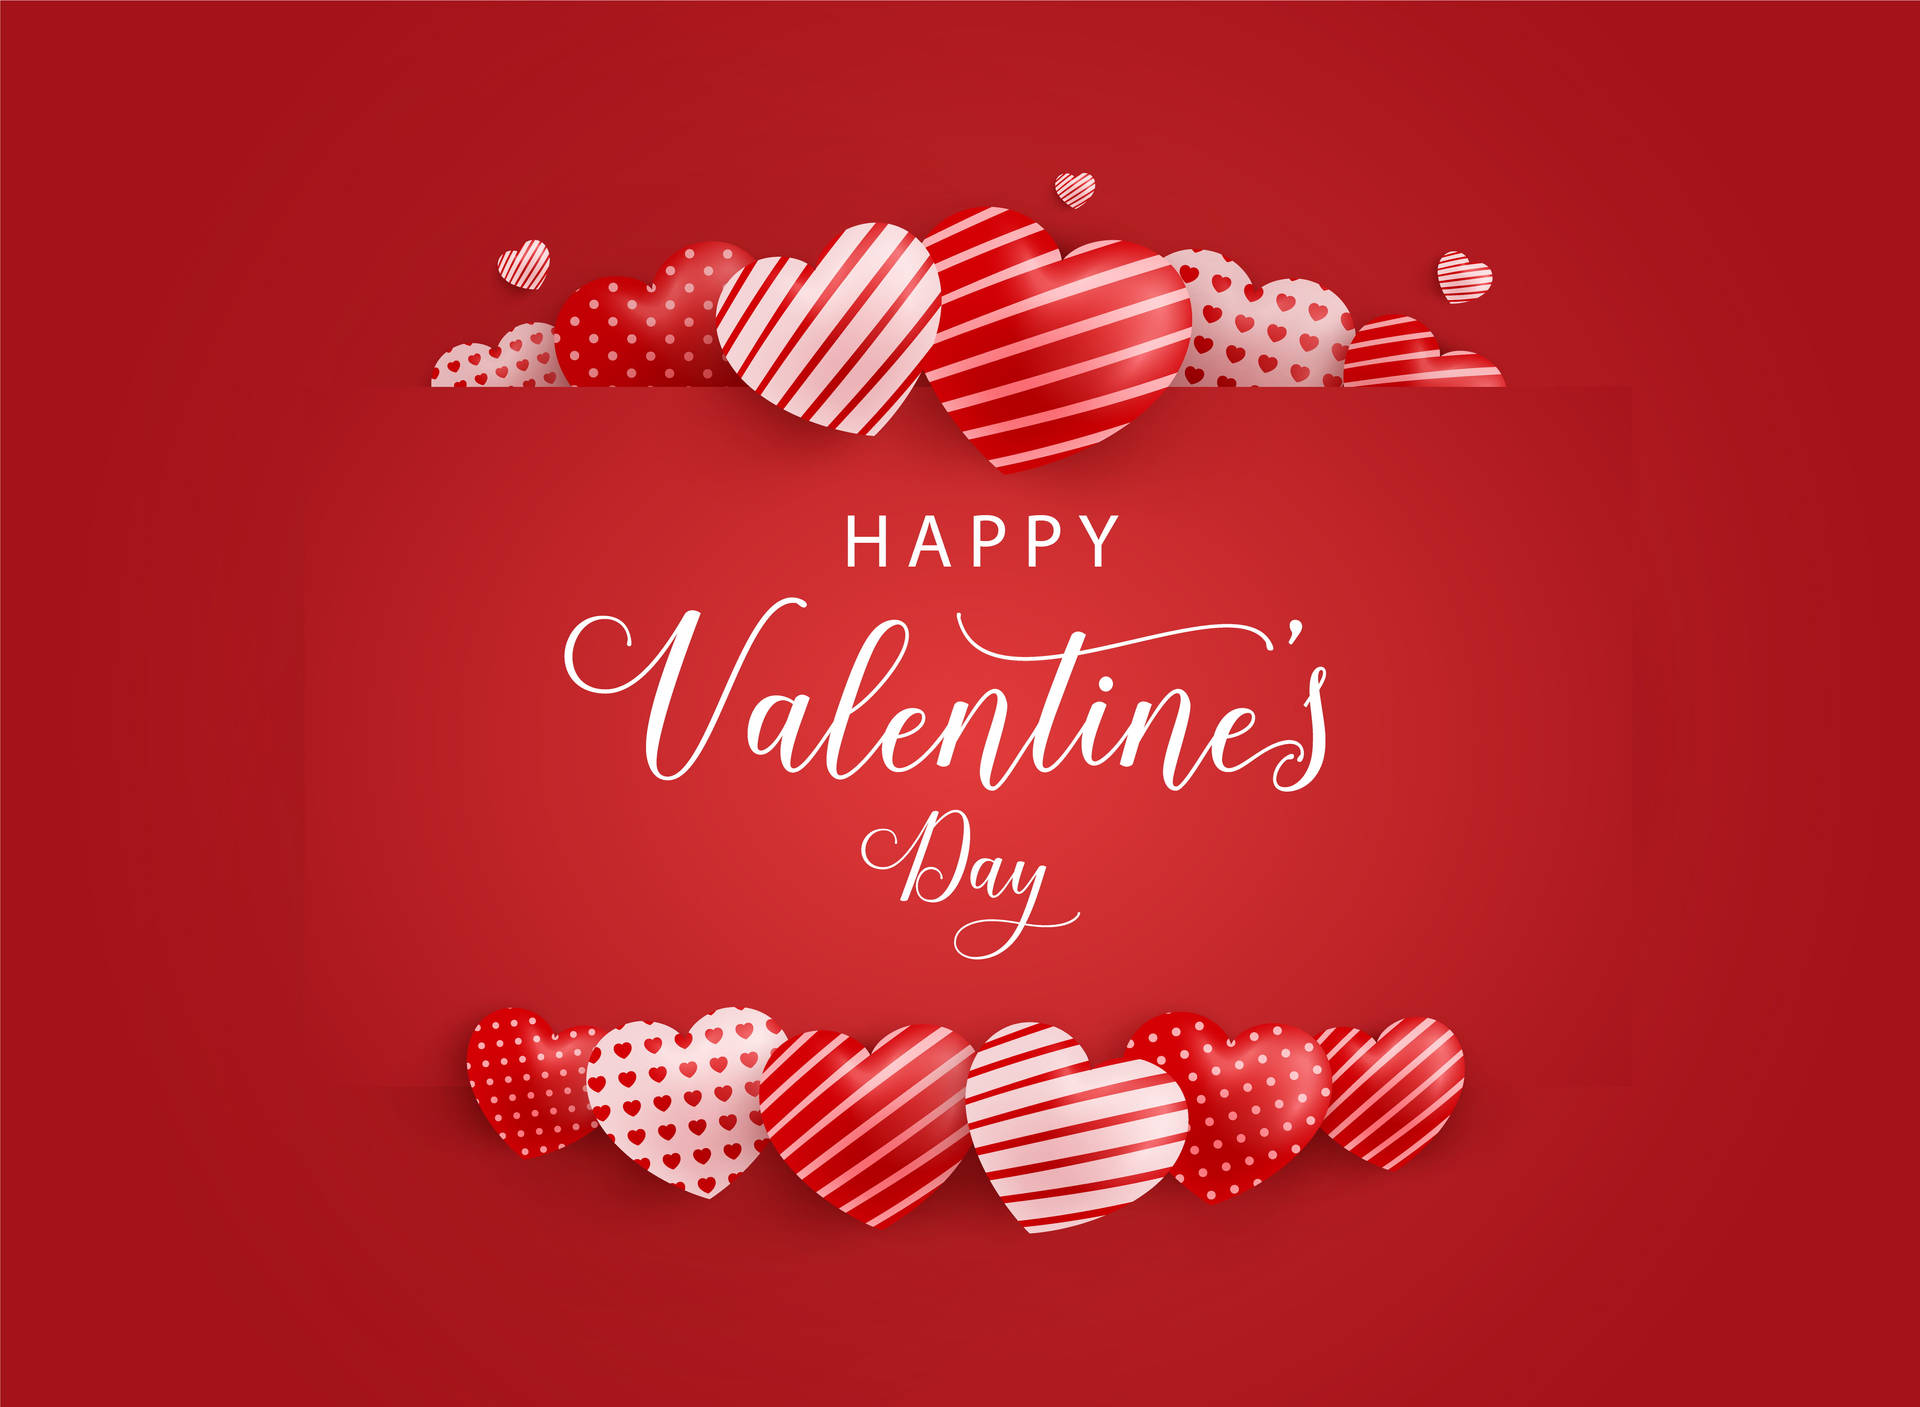 Amazing Happy Valentines Day Love Wallpapers,Gif Images For True Love -  Holiday Wishes